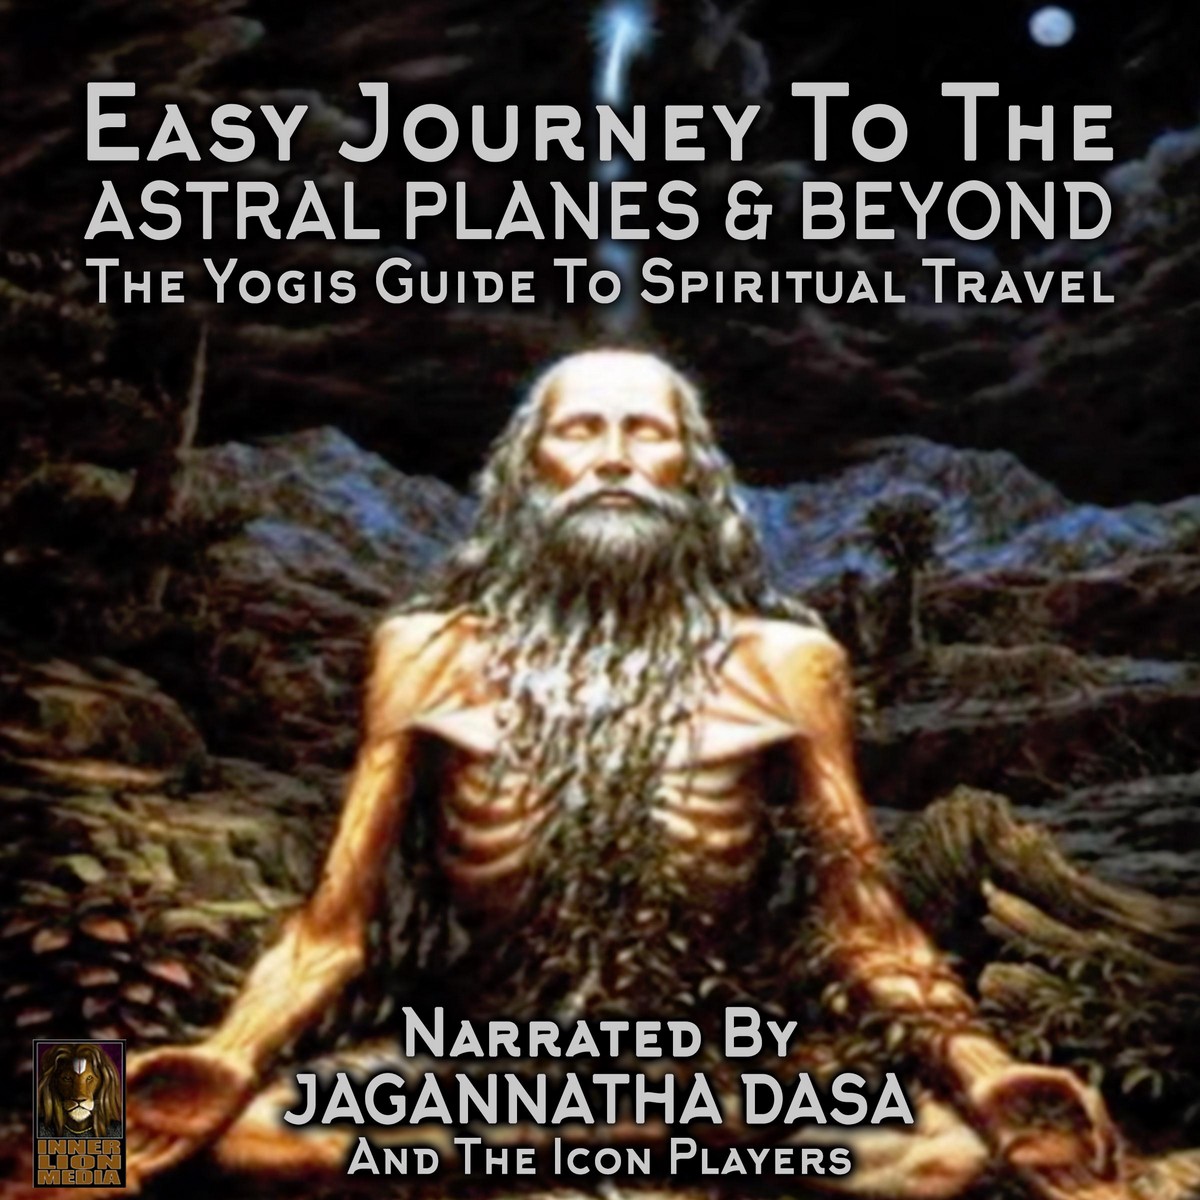 Easy Journey to the Astral Planes & Beyond; The Yogis Guide to Spiritual Travel